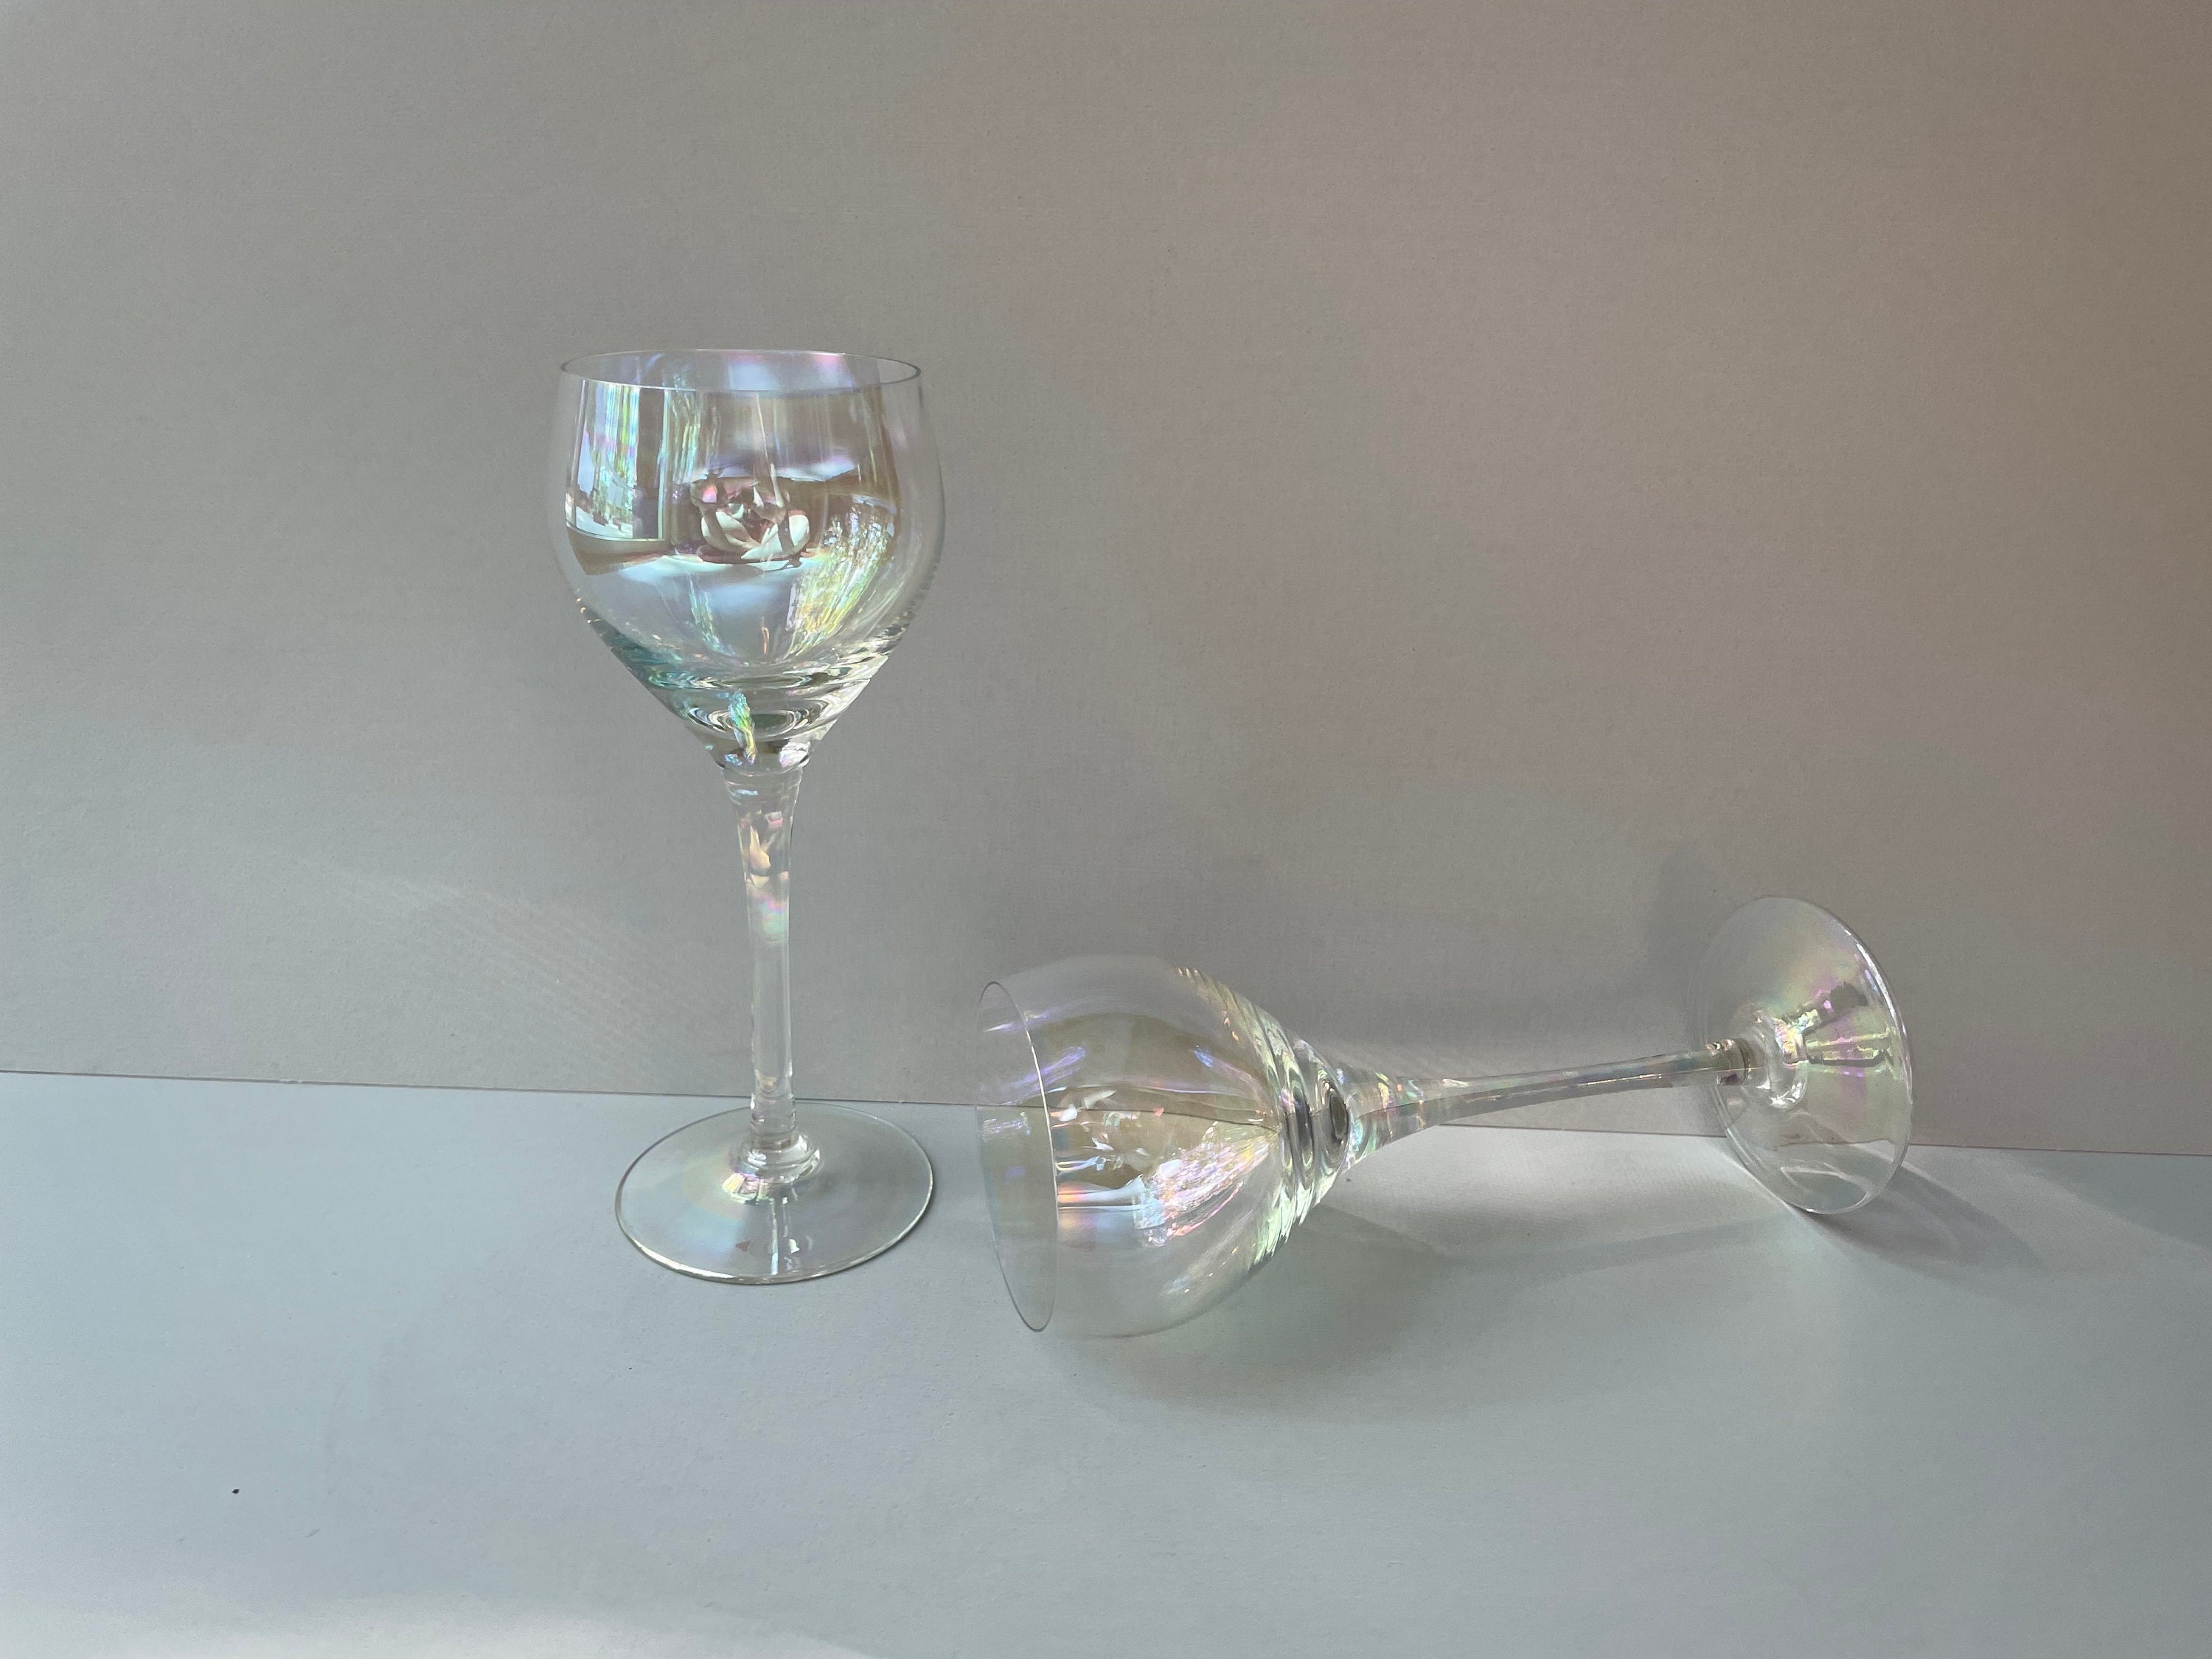 Set of 2 Small Iridescent Wine Glasses – Objects Inanimate